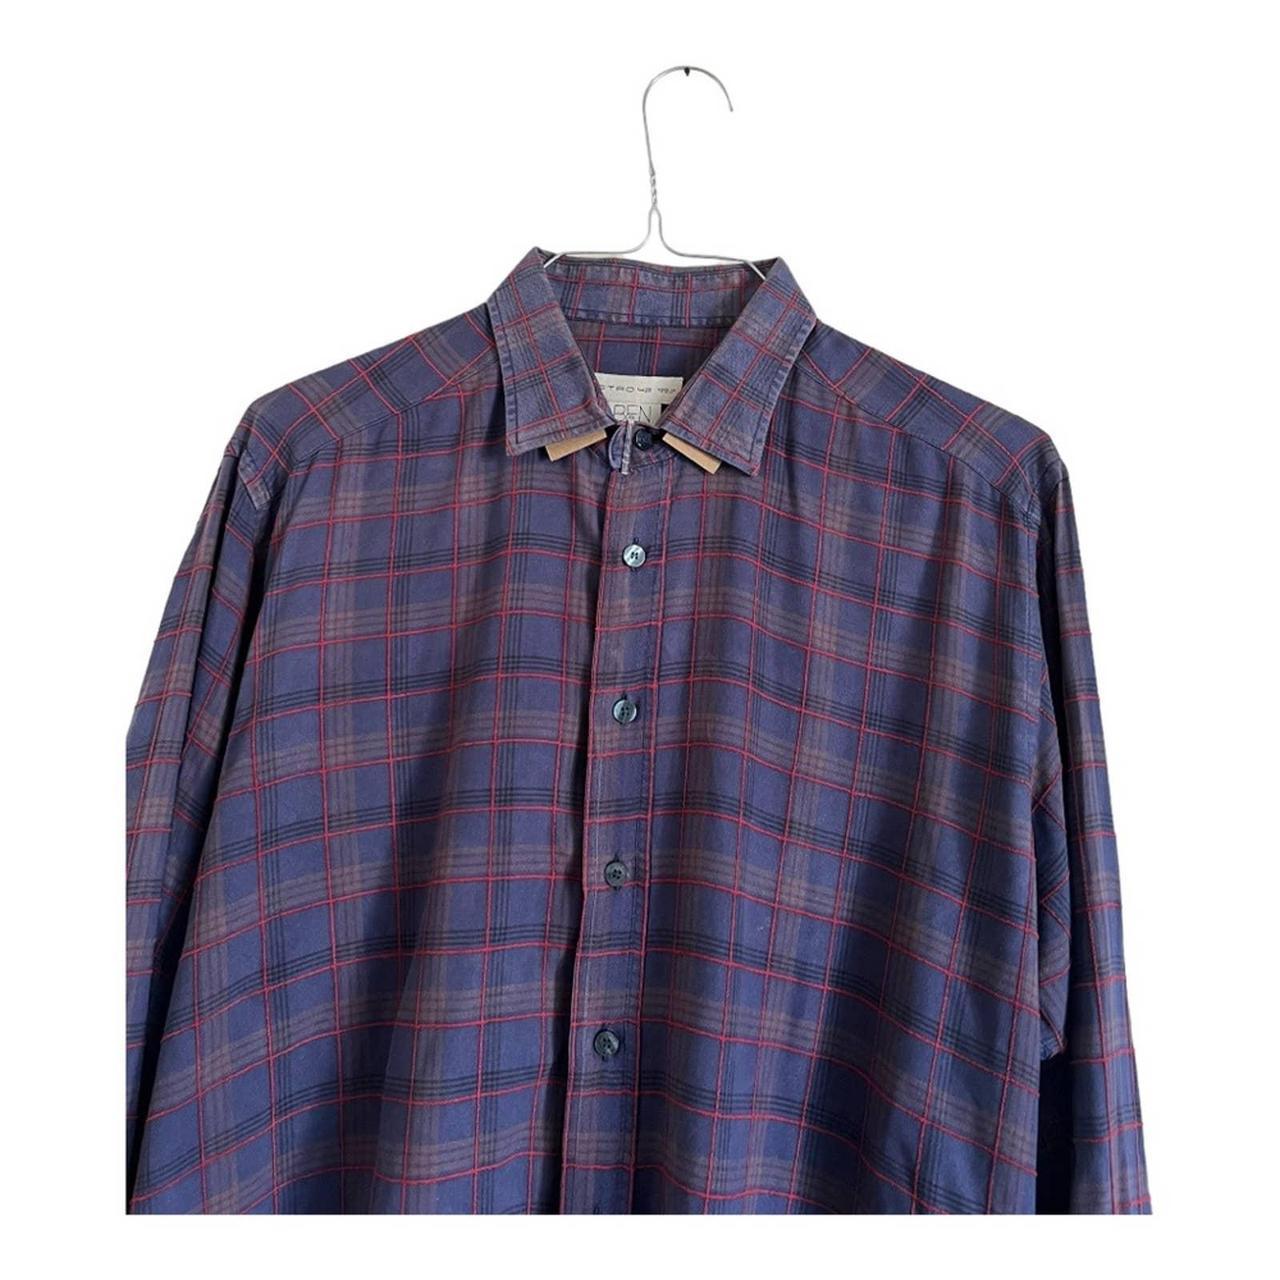 Etro Men's Blue and Red Shirt (4)